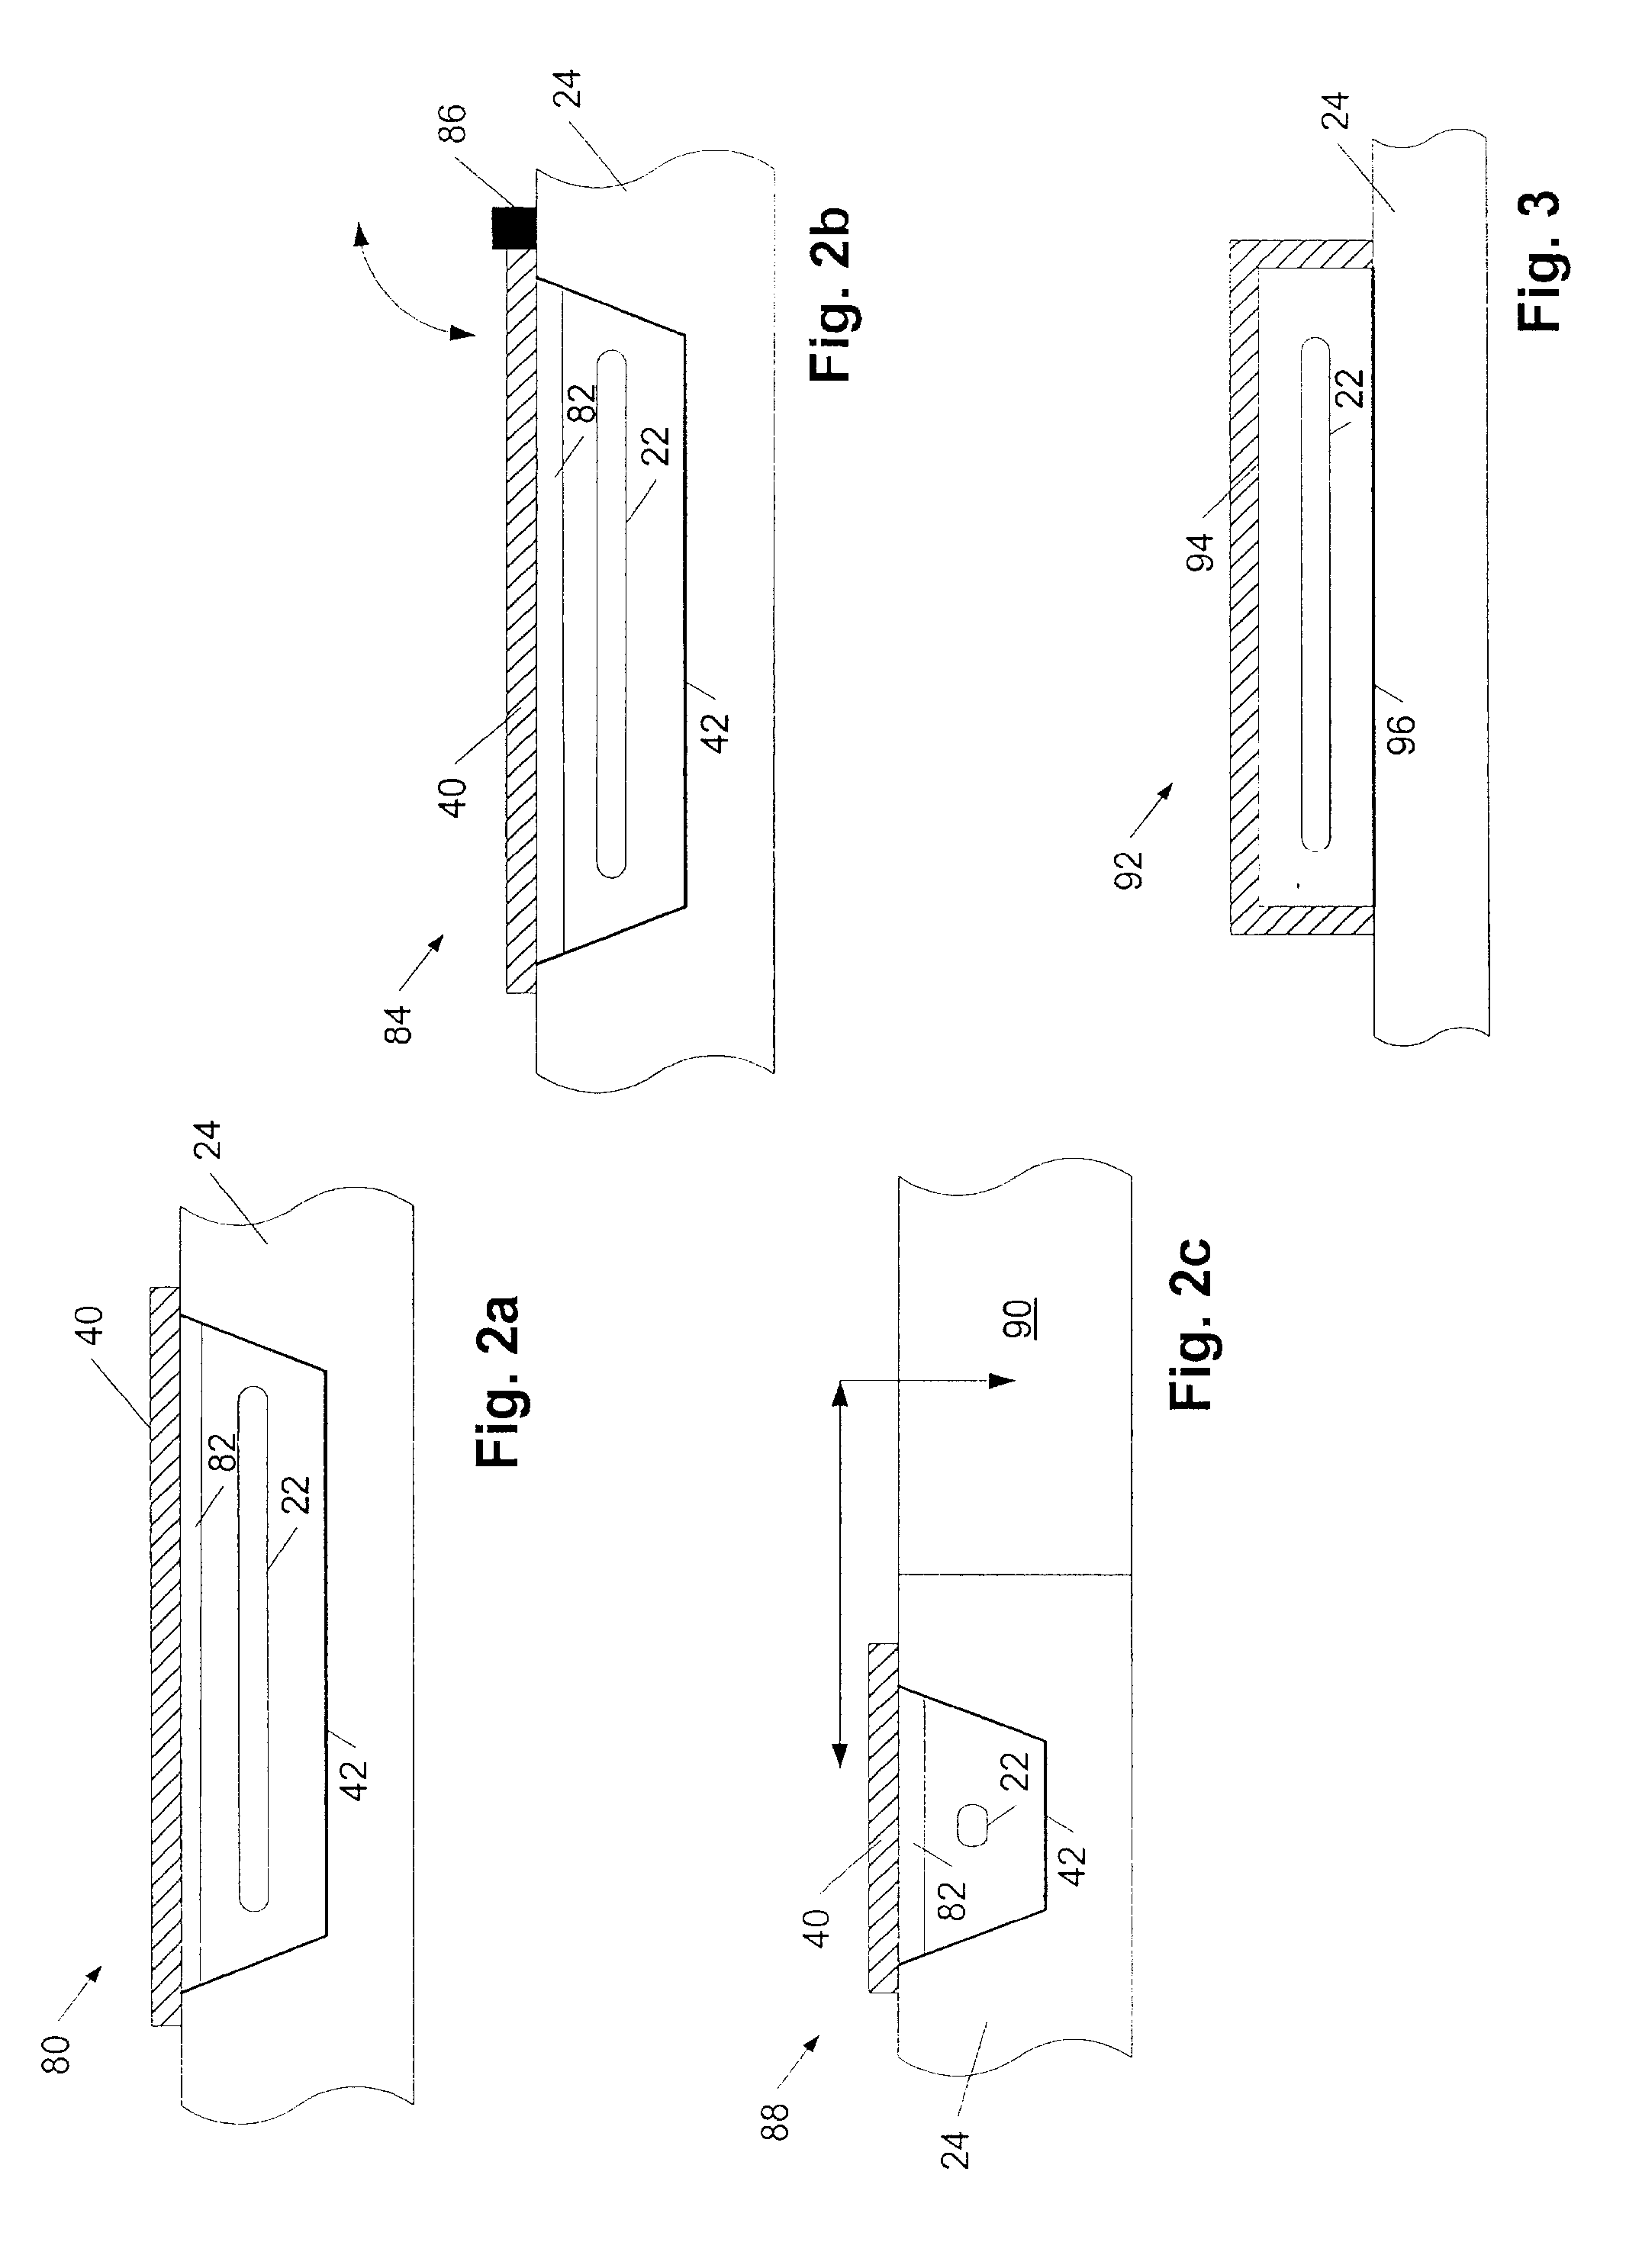 Ultraviolet Discharge Lamp Apparatuses Having Optical Filters Which Attenuate Visible Light